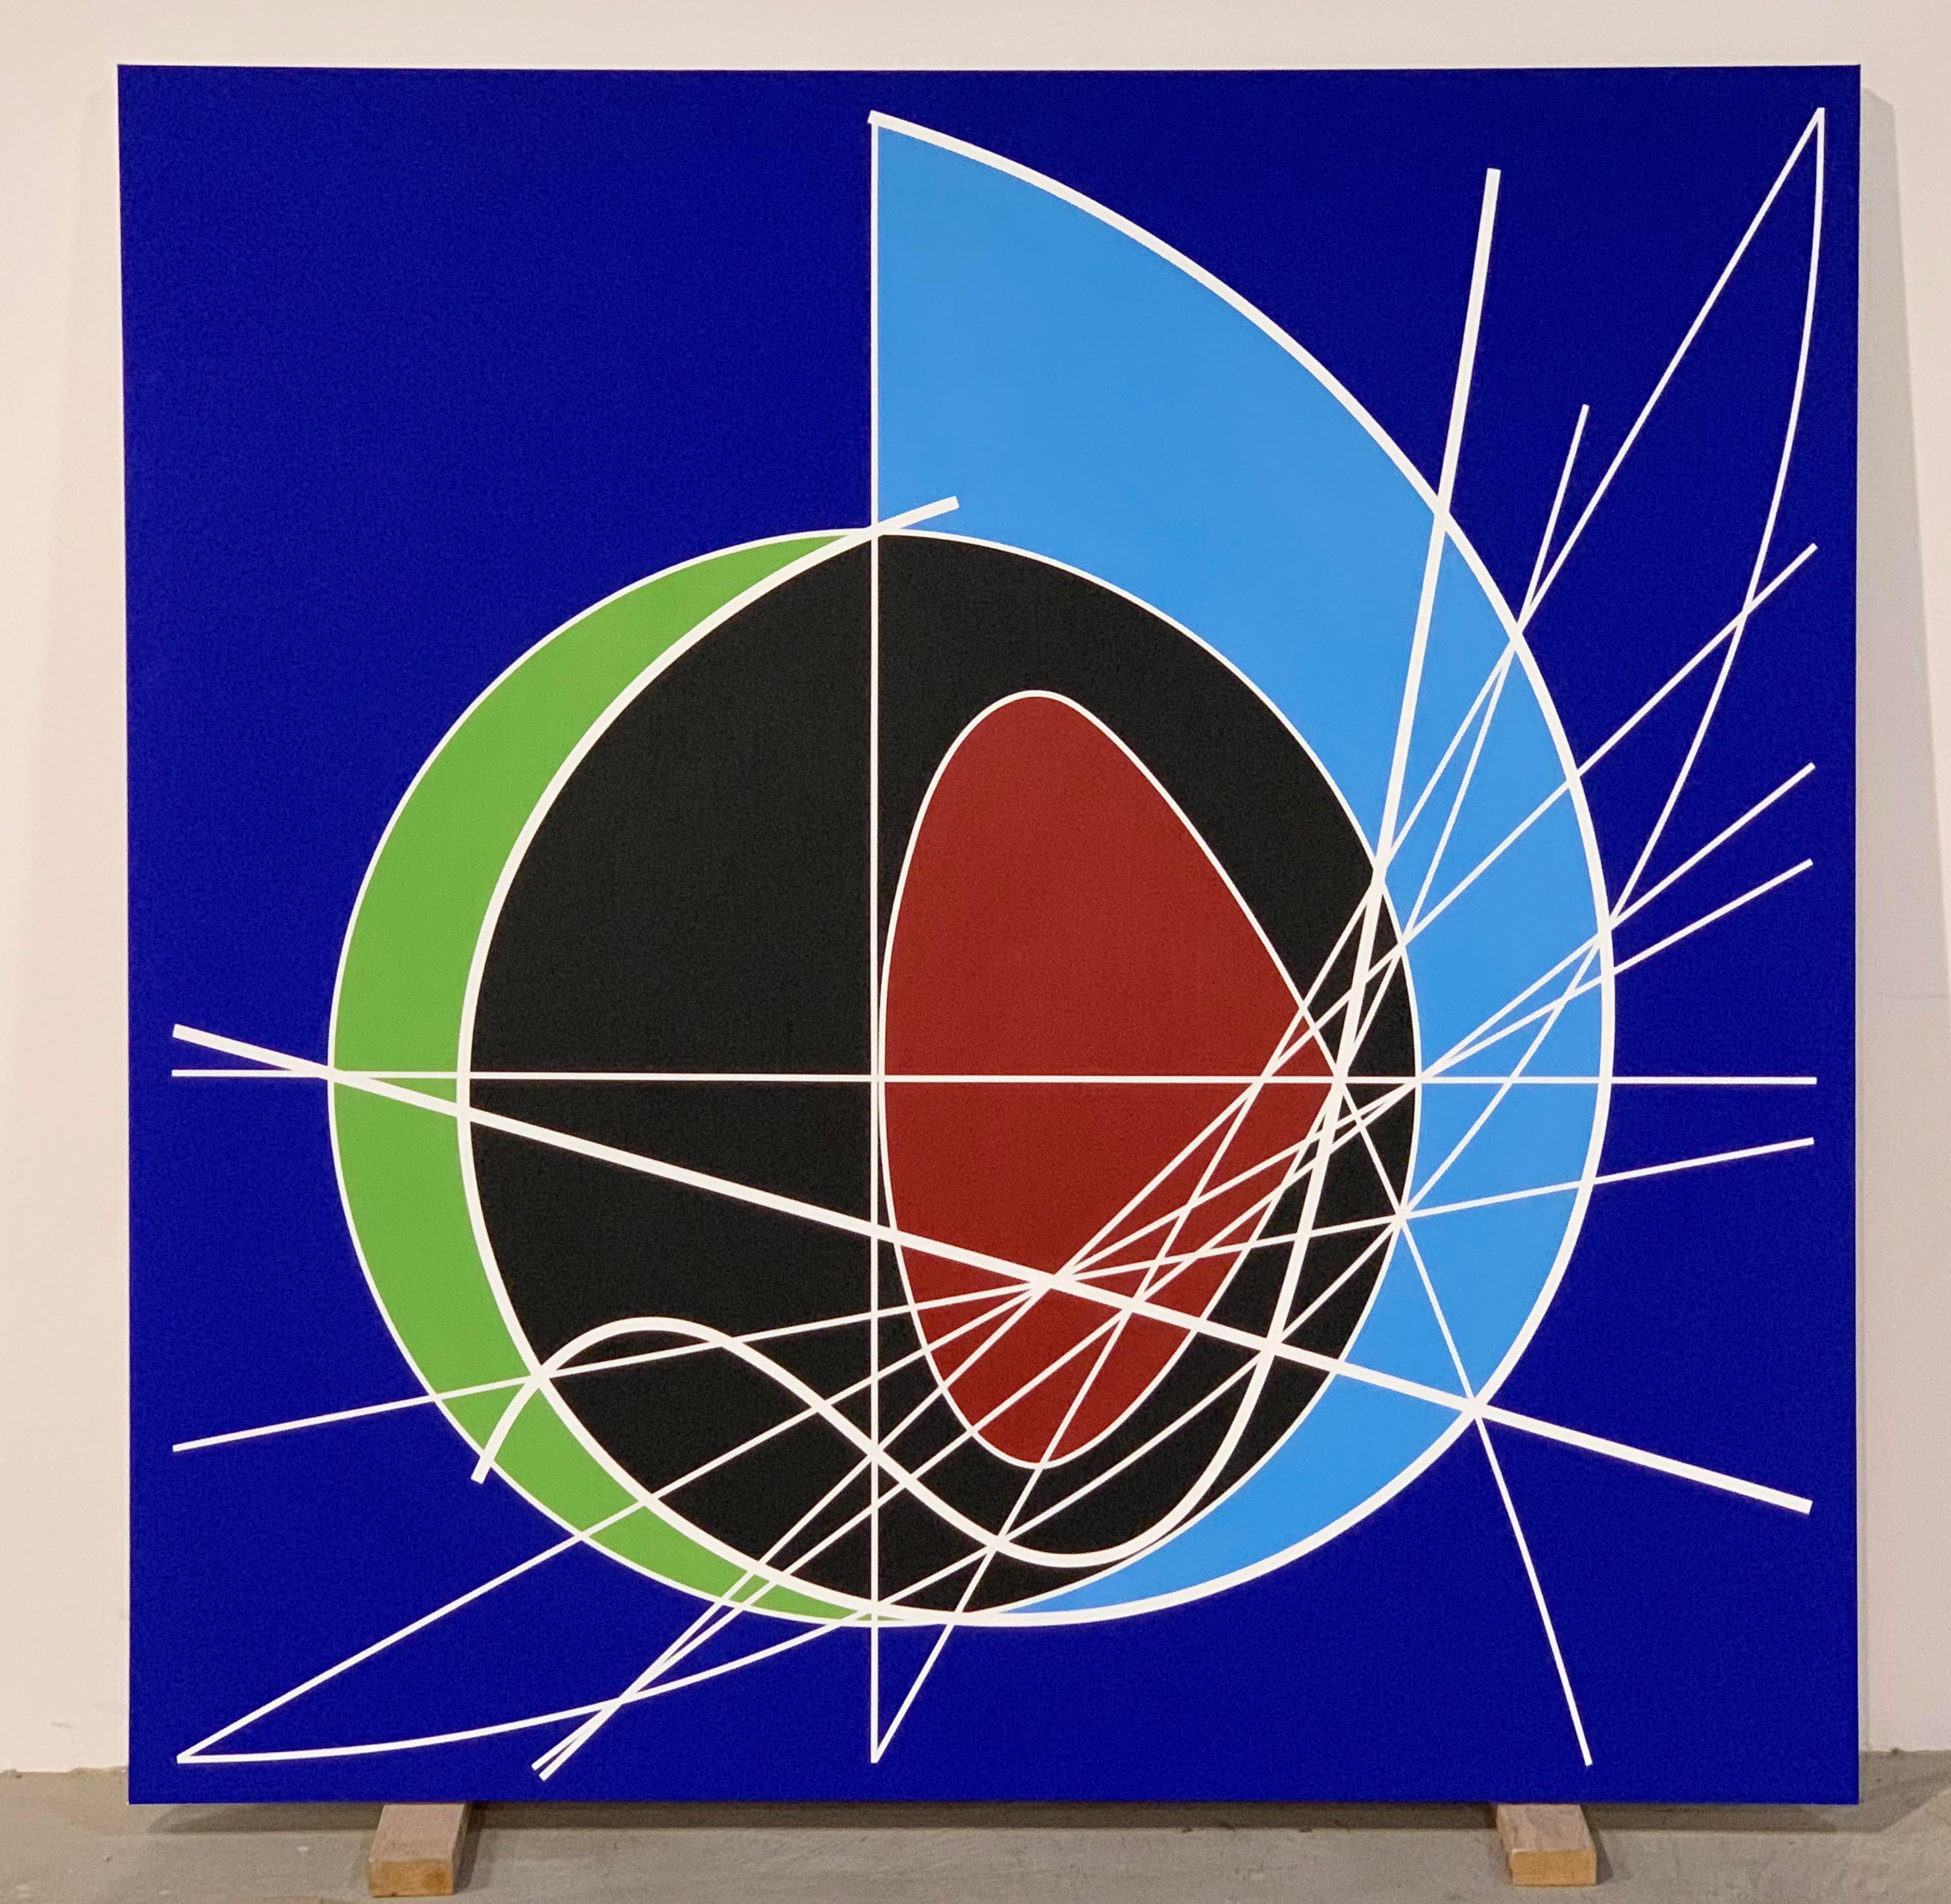 Clifford Singer Abstract Painting – Kontinuität